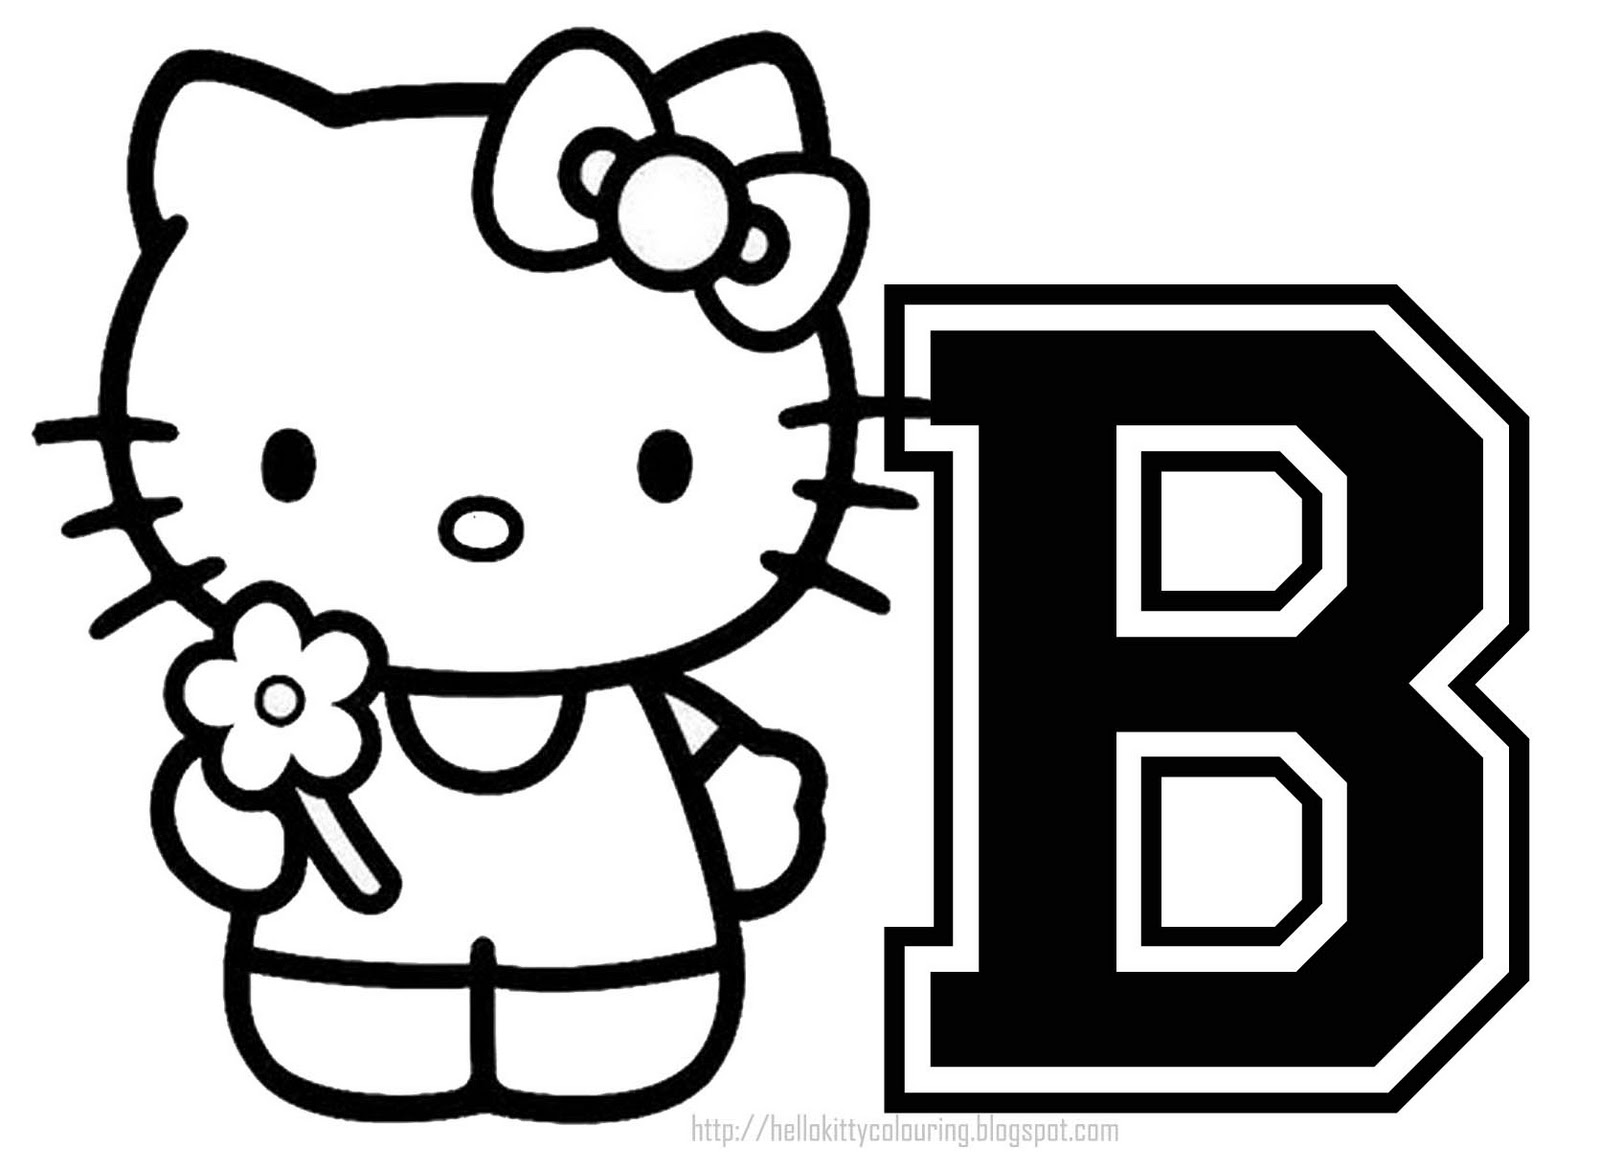 hello kitty i love you coloring pages